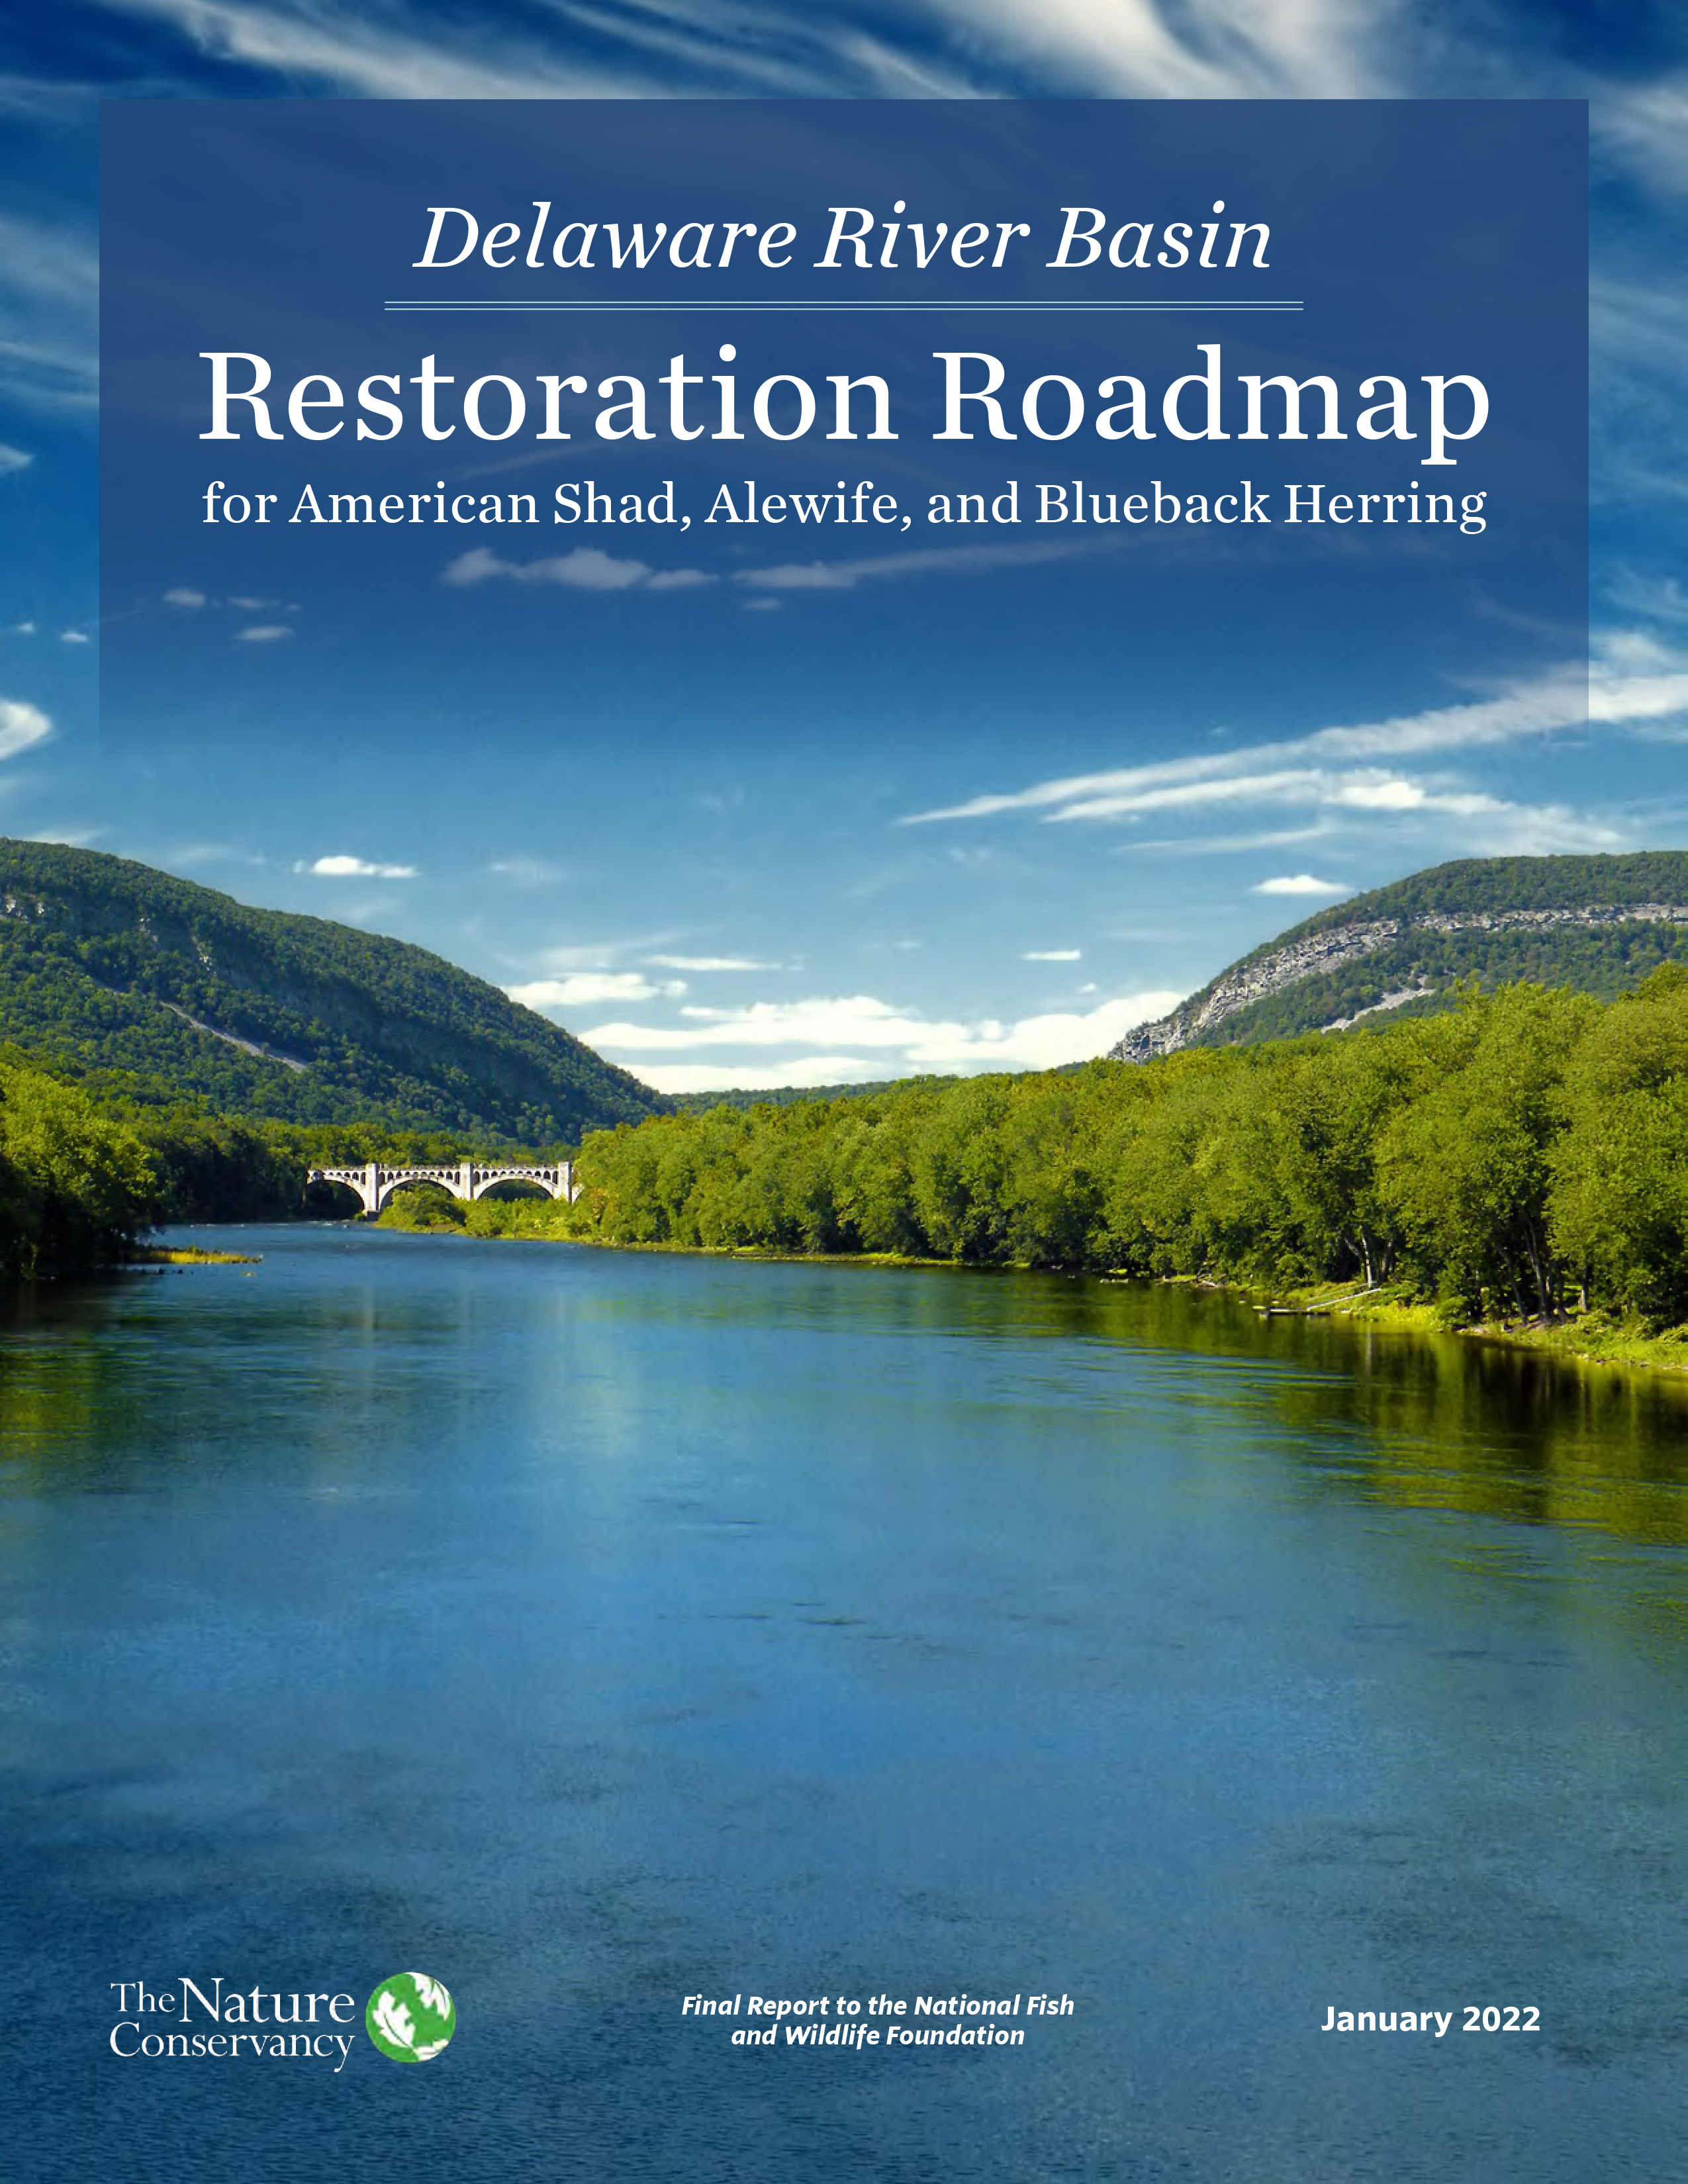 Restoration document entitled Delaware River Basin Restoration Roadmap for American Shad, Alewife, and Blueback Herring. The cover shows a wide, calm river flowing between tree lined banks.